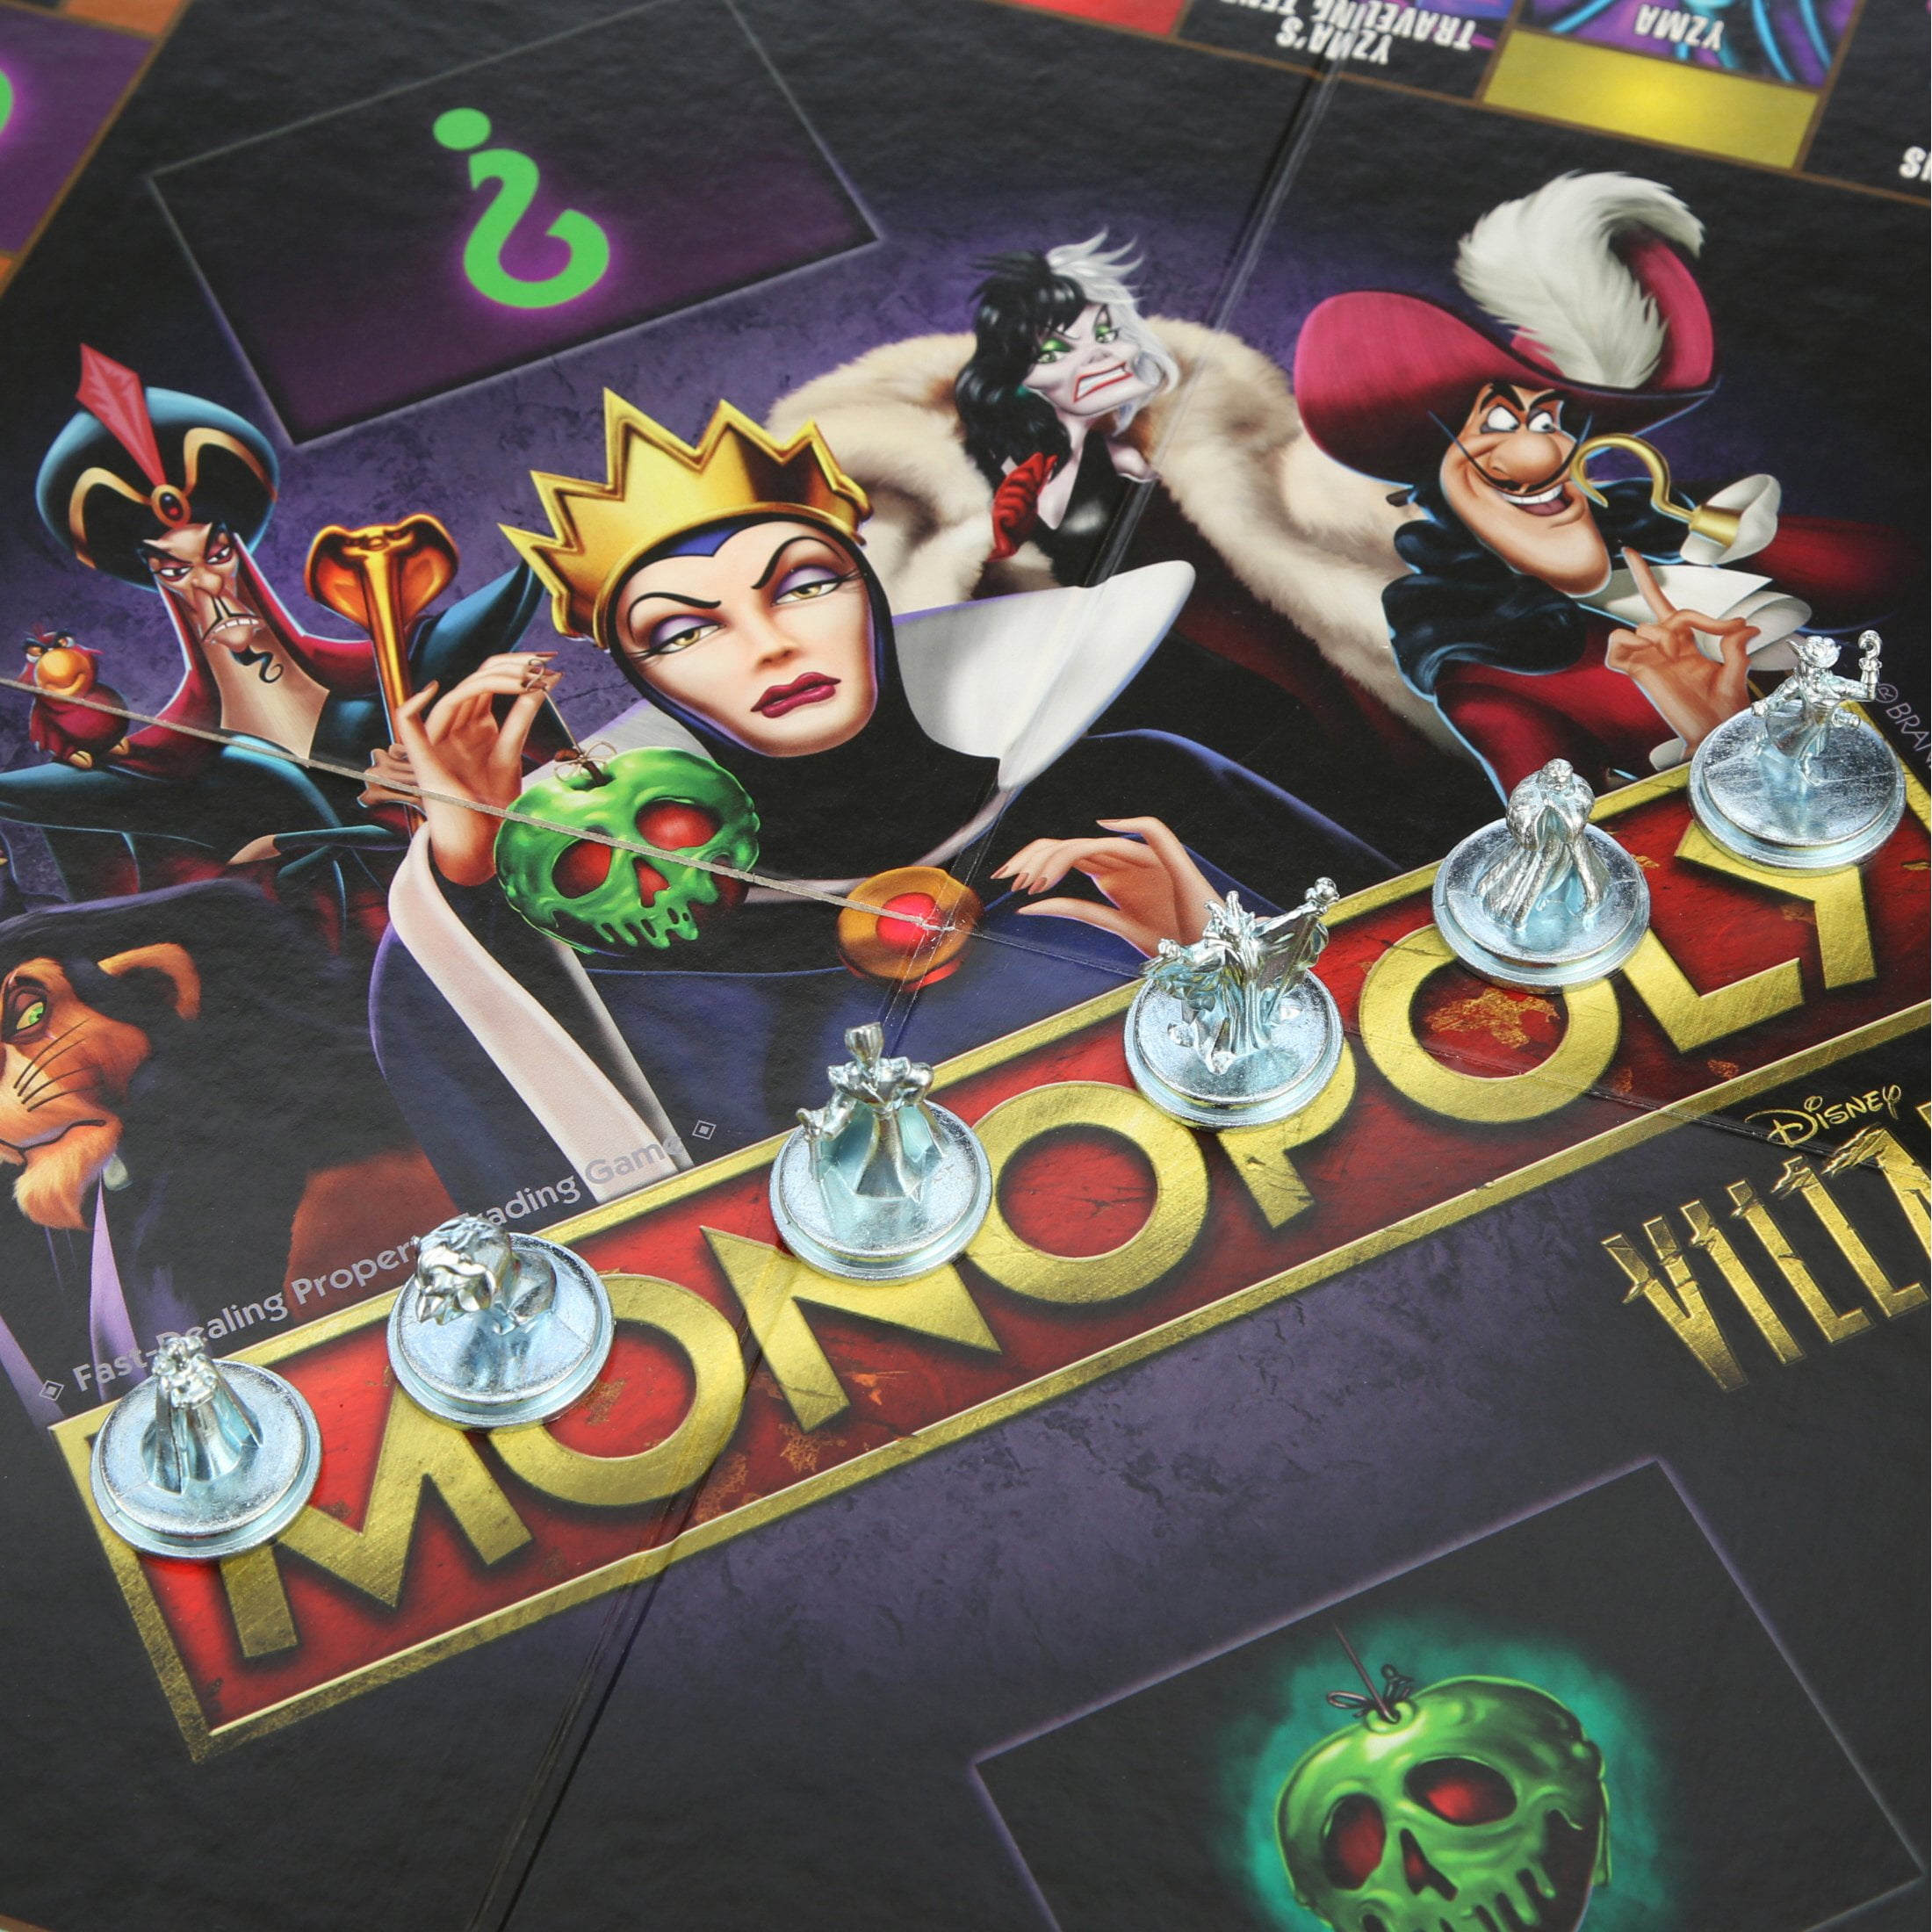 Hasbro Gaming Monopoly: Disney Villains Henchmen Edition Board Game for  Kids Ages 8 and Up ( Exclusive) - Yahoo Shopping